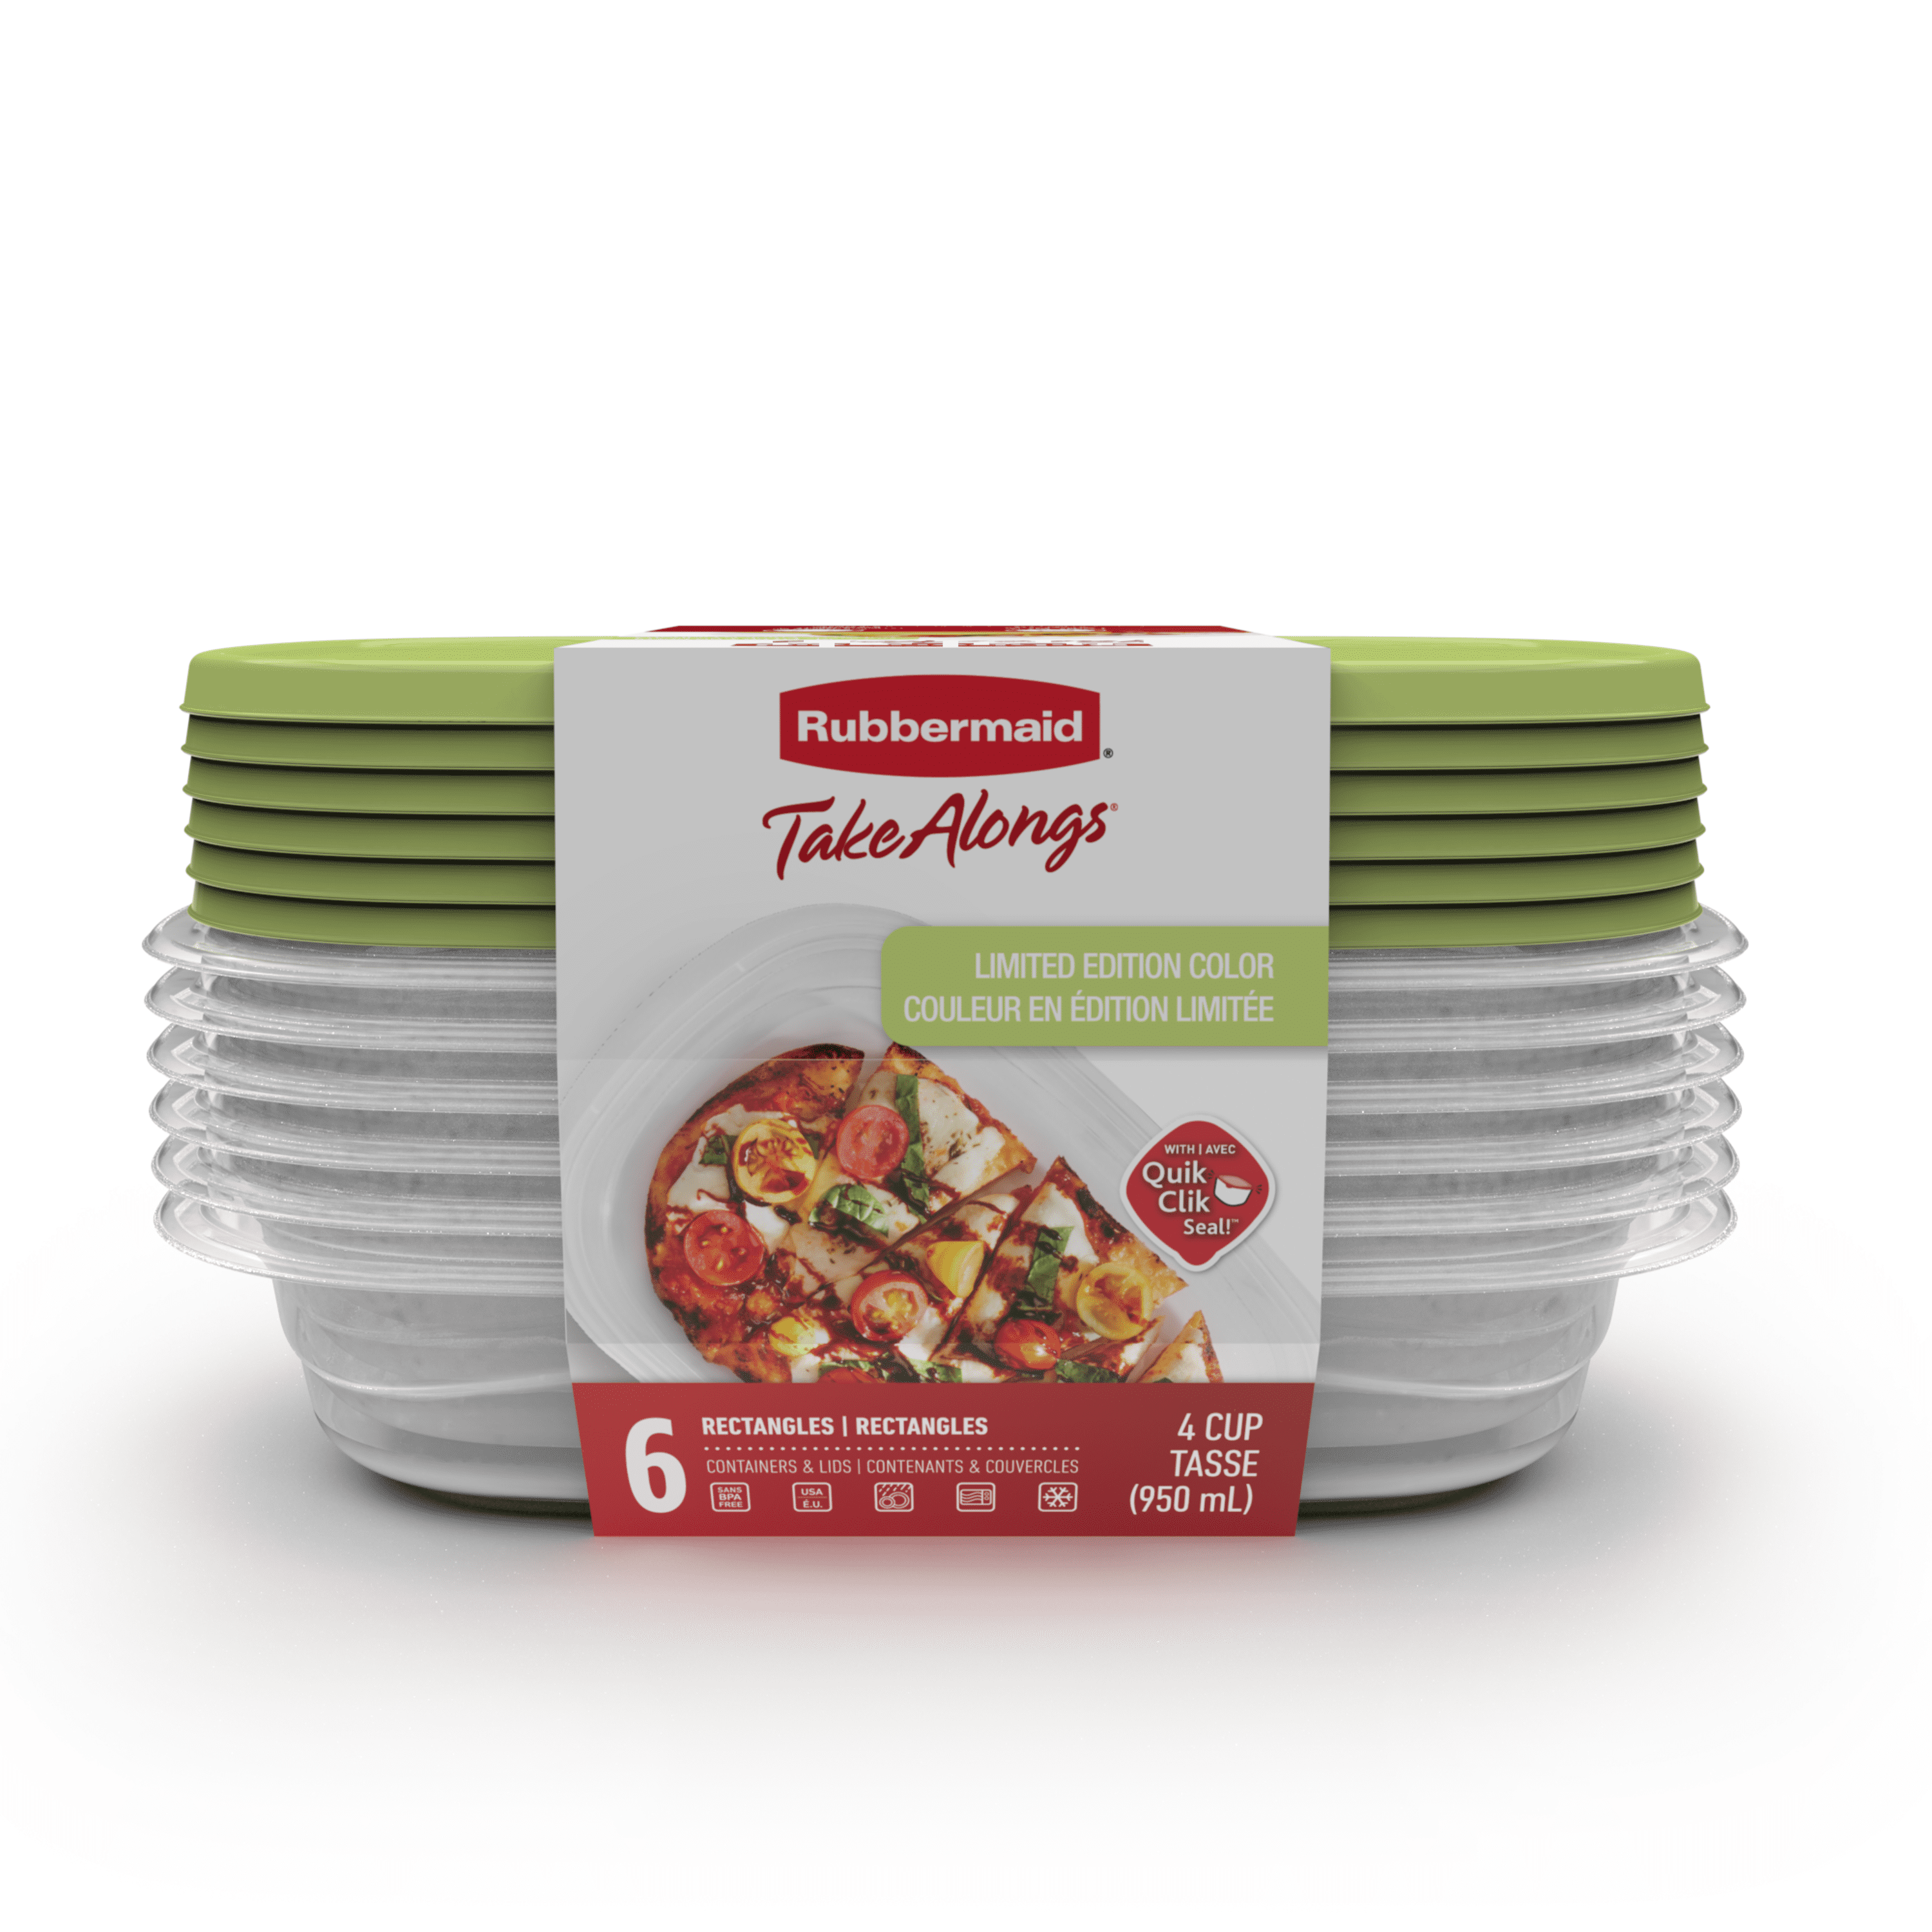 Rubbermaid Take Alongs Rectangular Containers with Lids, 6.4 x 3.1 x 9.8 - 3 pack